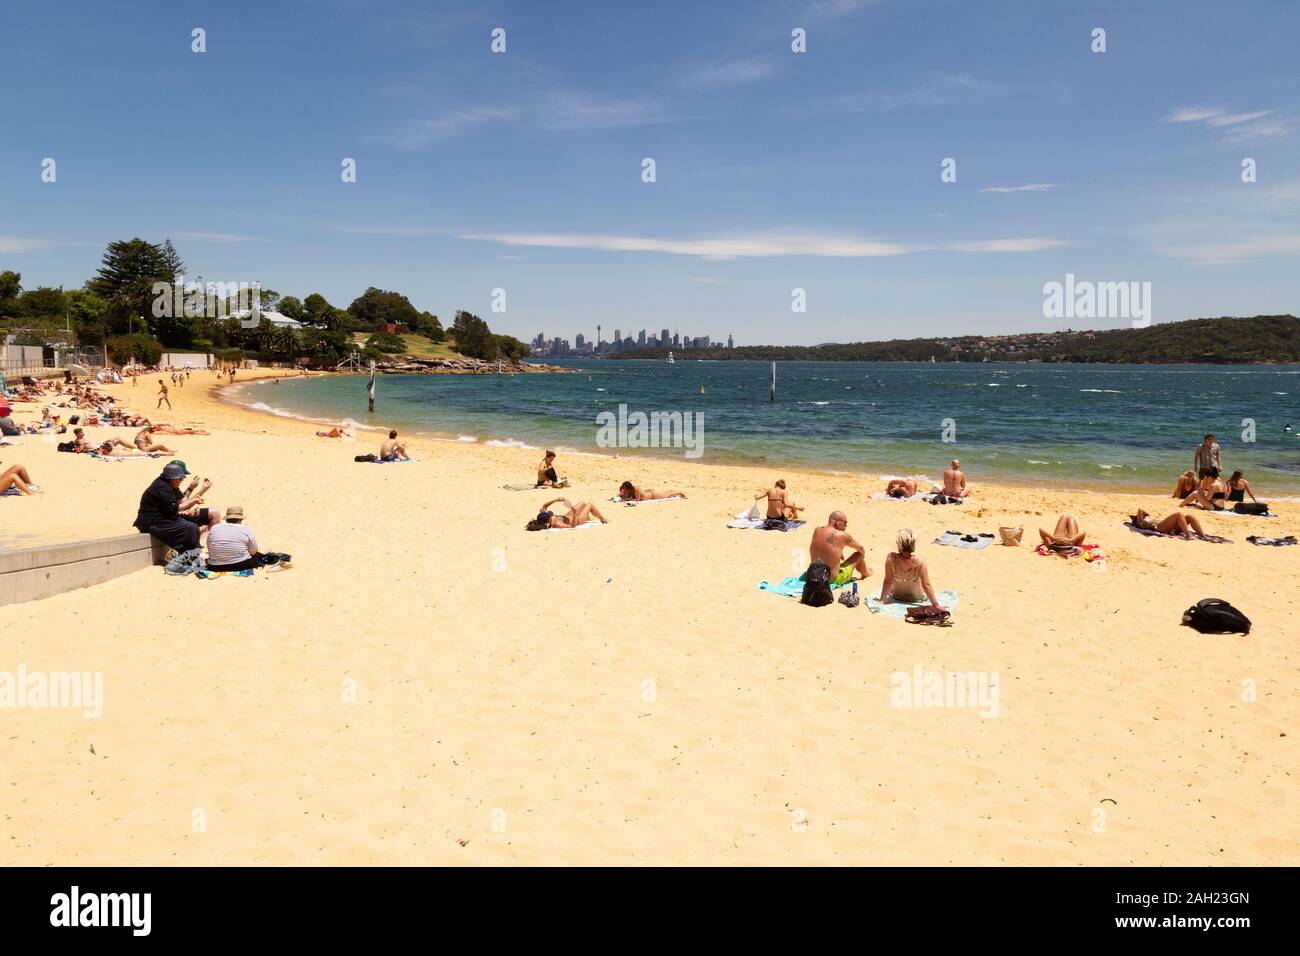 People sunbathing on Camp Cove beach on a sunny November day in spring, Camp Cove near Watsons Bay, Sydney Australia Stock Photo